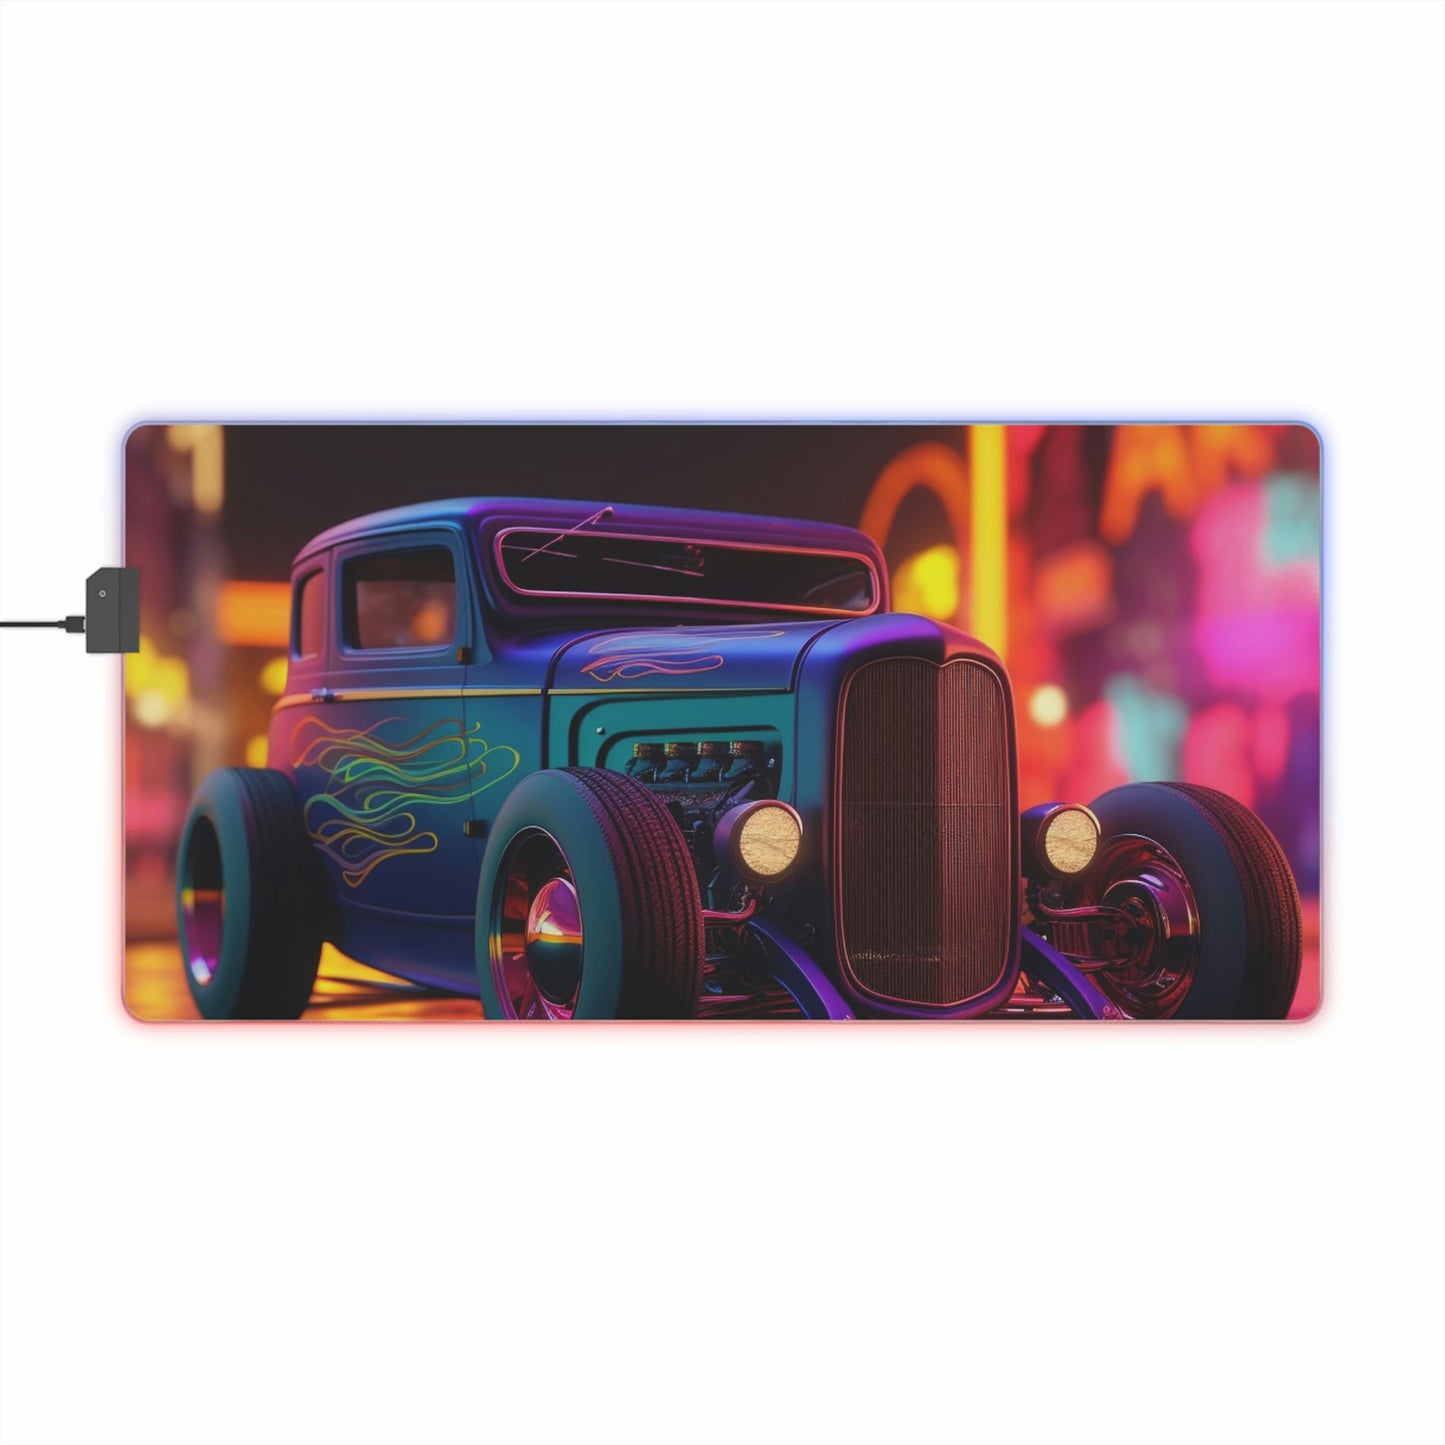 LED Gaming Mouse Pad Hyper Colorful Hotrod 2